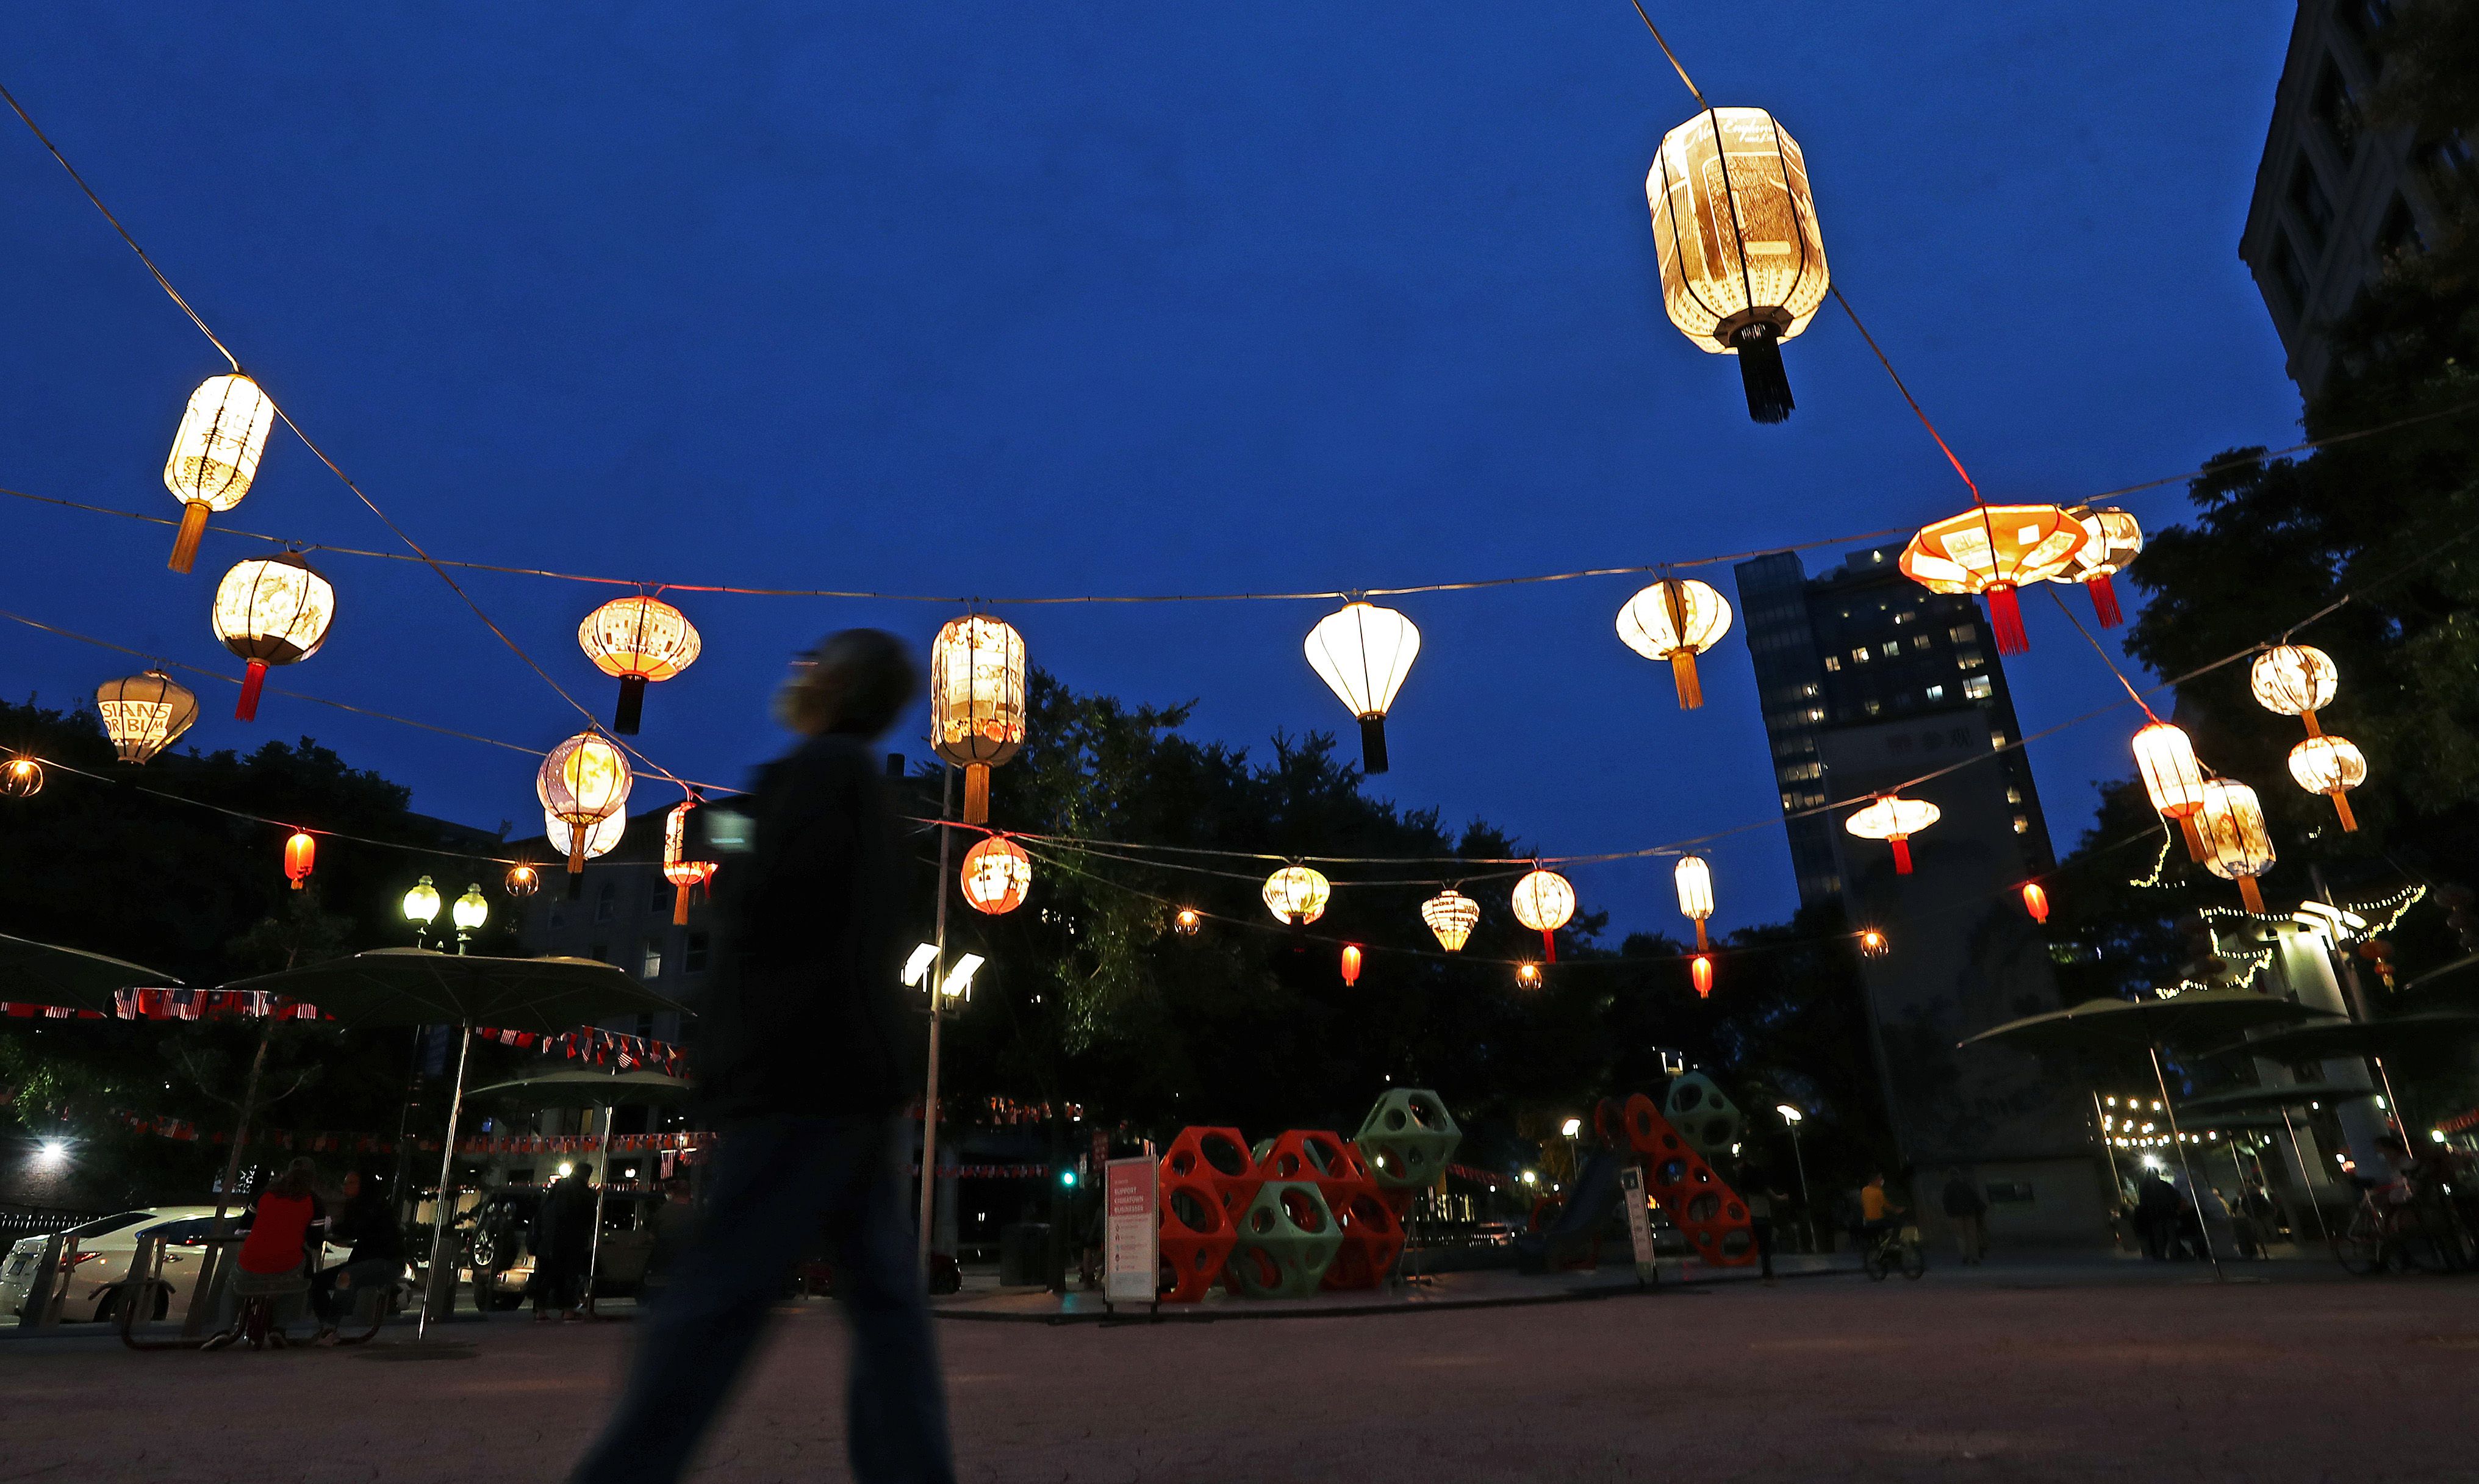 Artist lights up Chinatown with 'a wonderful canopy' of lanterns